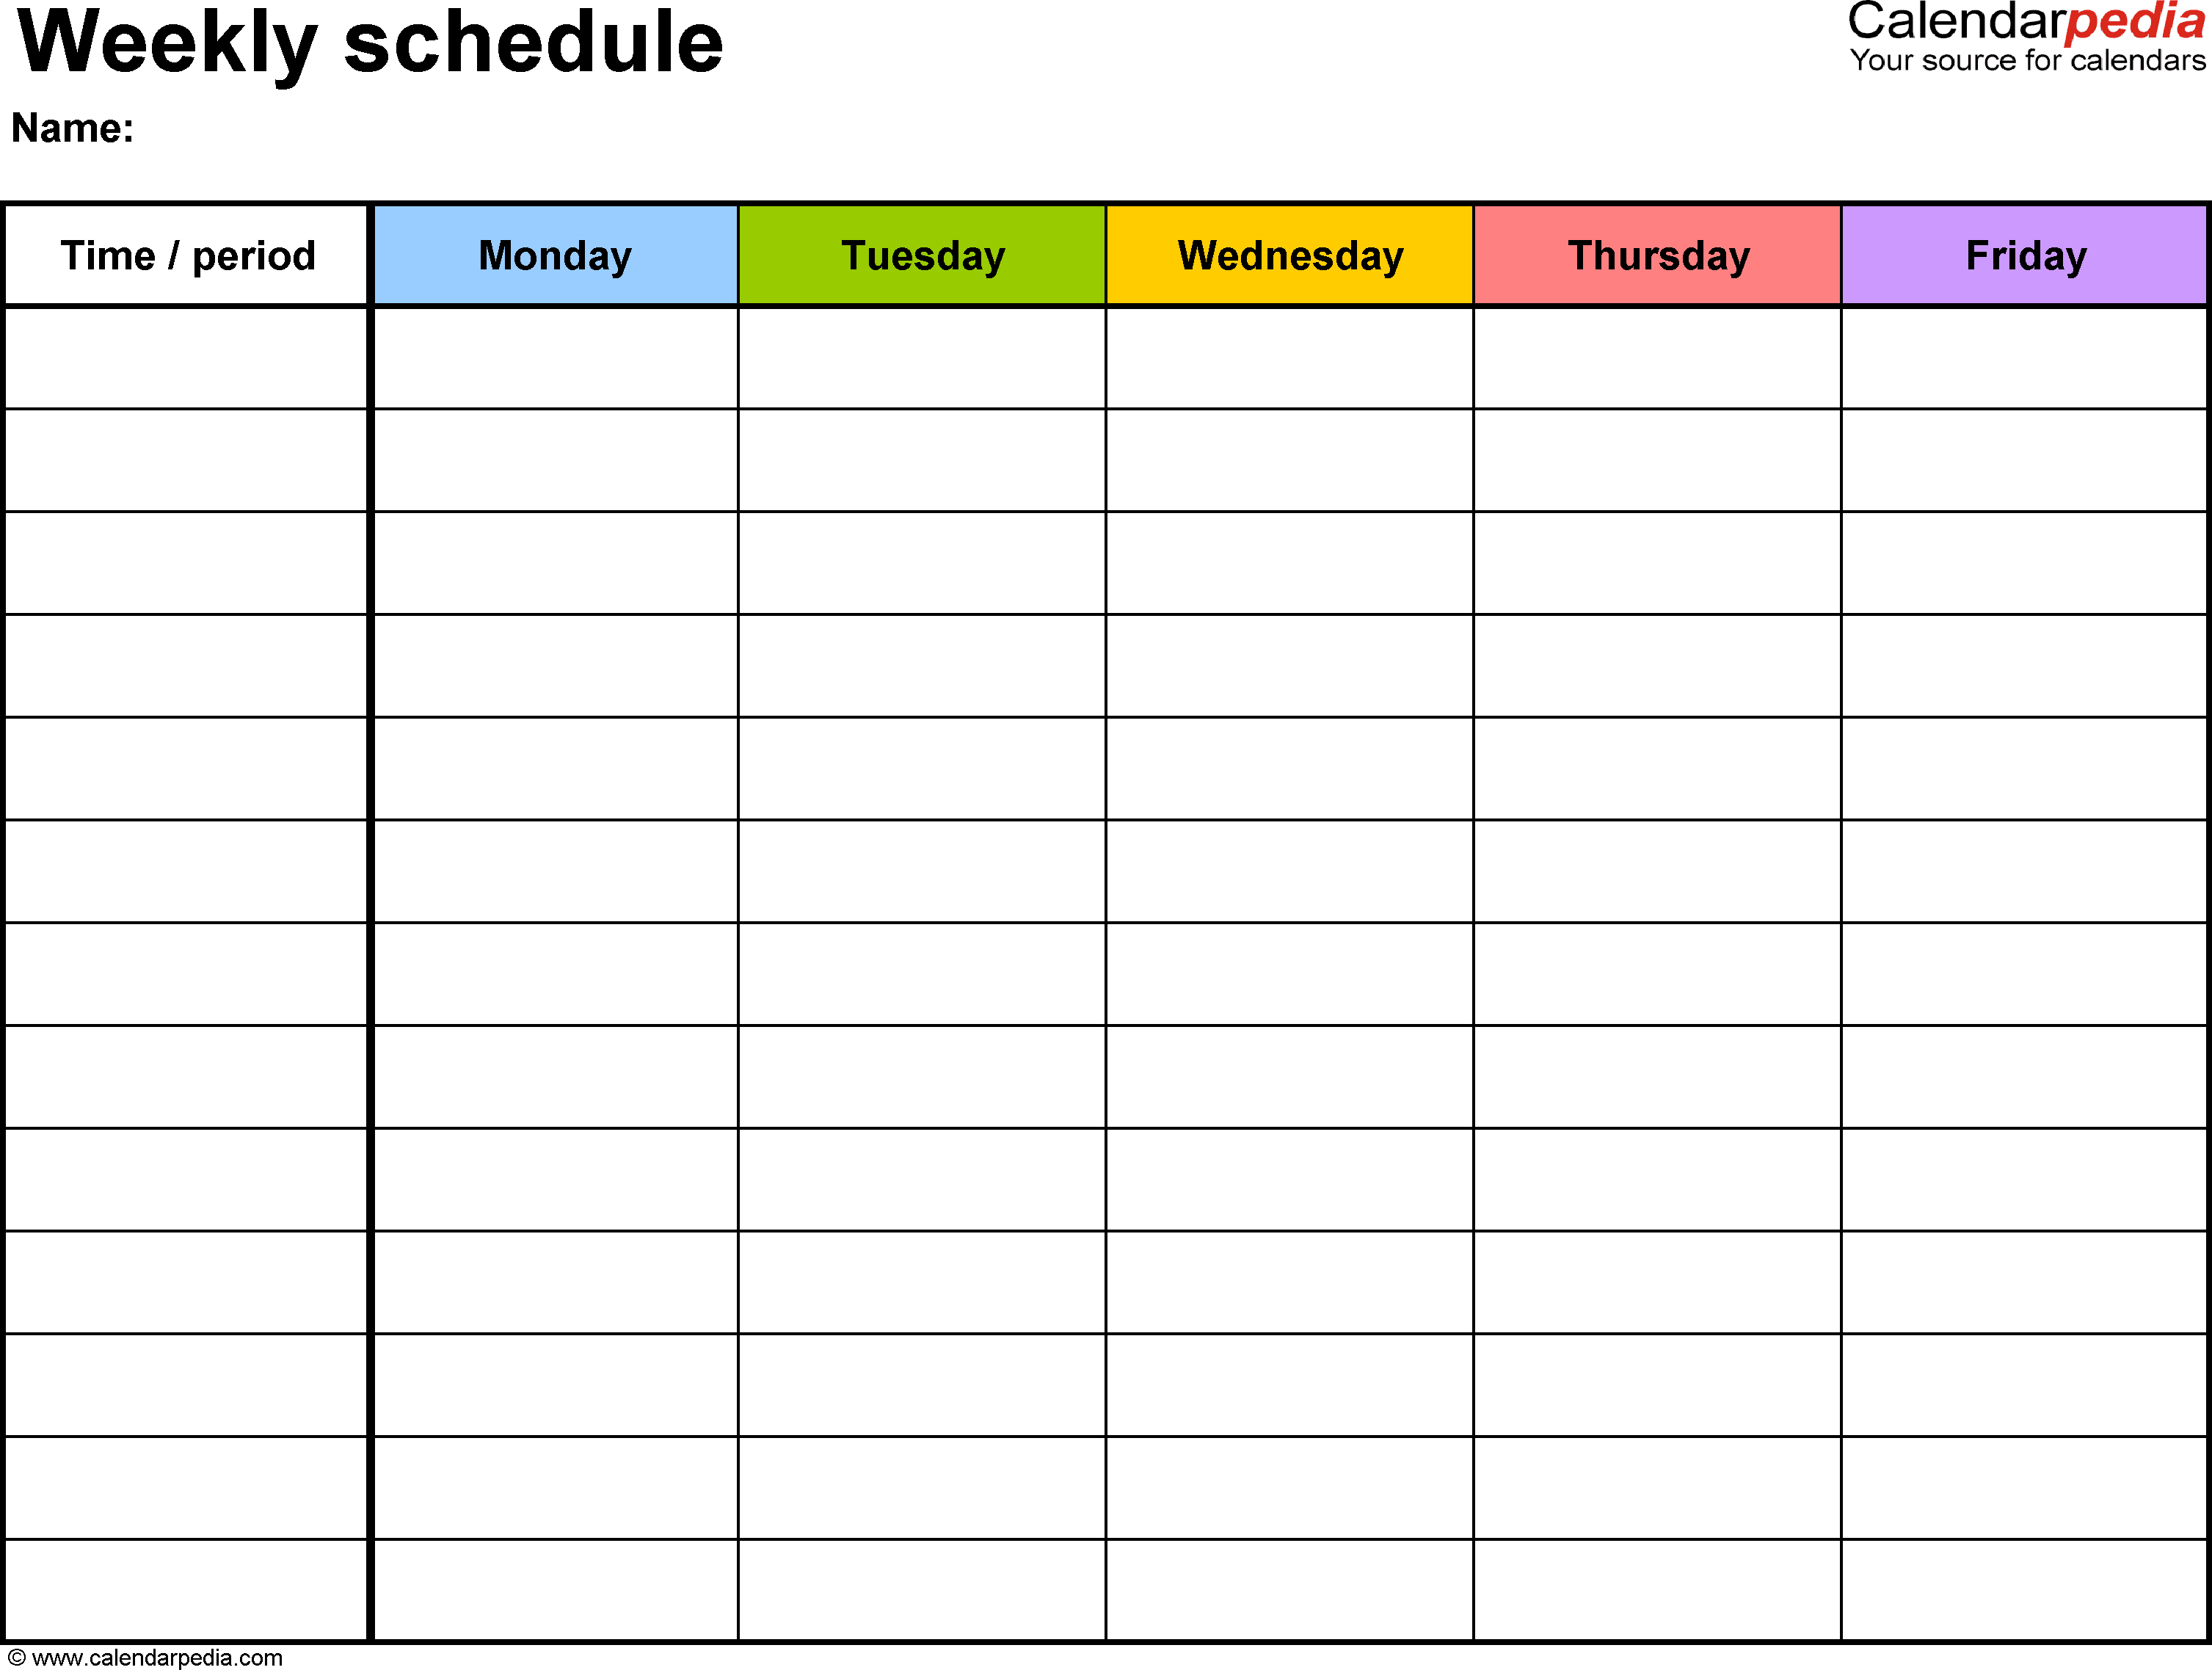 Weekly Schedule Template For Pdf Version 1: Landscape, 1